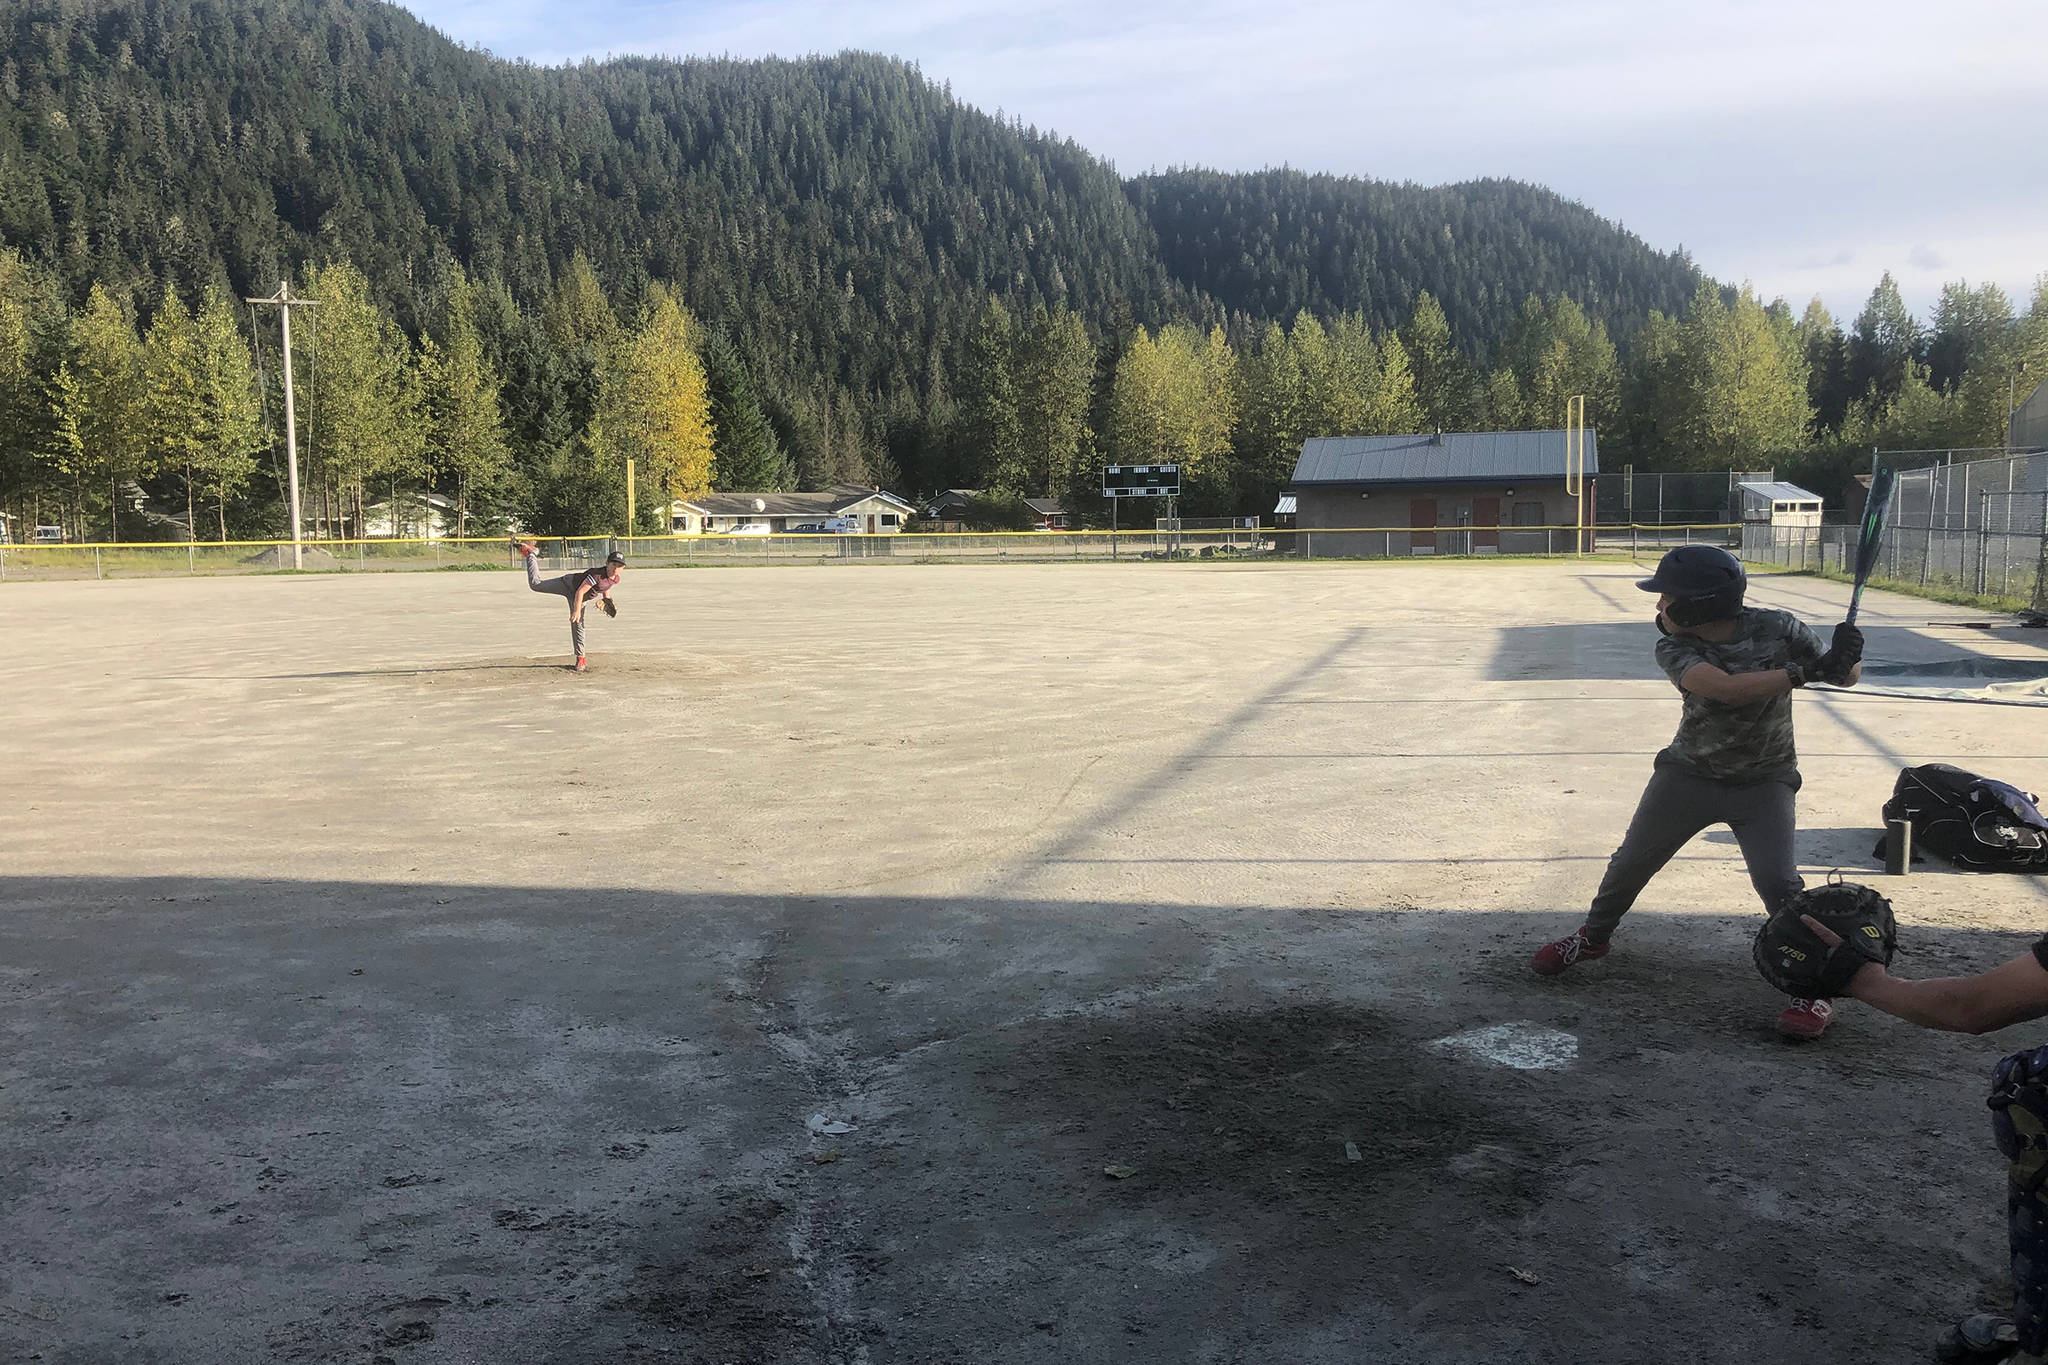 Youths play sandlot baseball at Miller Field in the summer of 2020. After COVID-19 sidelined a competitive season last summer, local players gathered to play sandlot ball. Thanks to a city-approved COVID-19 mitigation plan, the Gastineau Channel Baseball and Softball Leagues are planning a full, competitive season this summer. Registration is now open for players between the ages of 5 and 16. (Courtesy Photo / Geoff Kirsch)